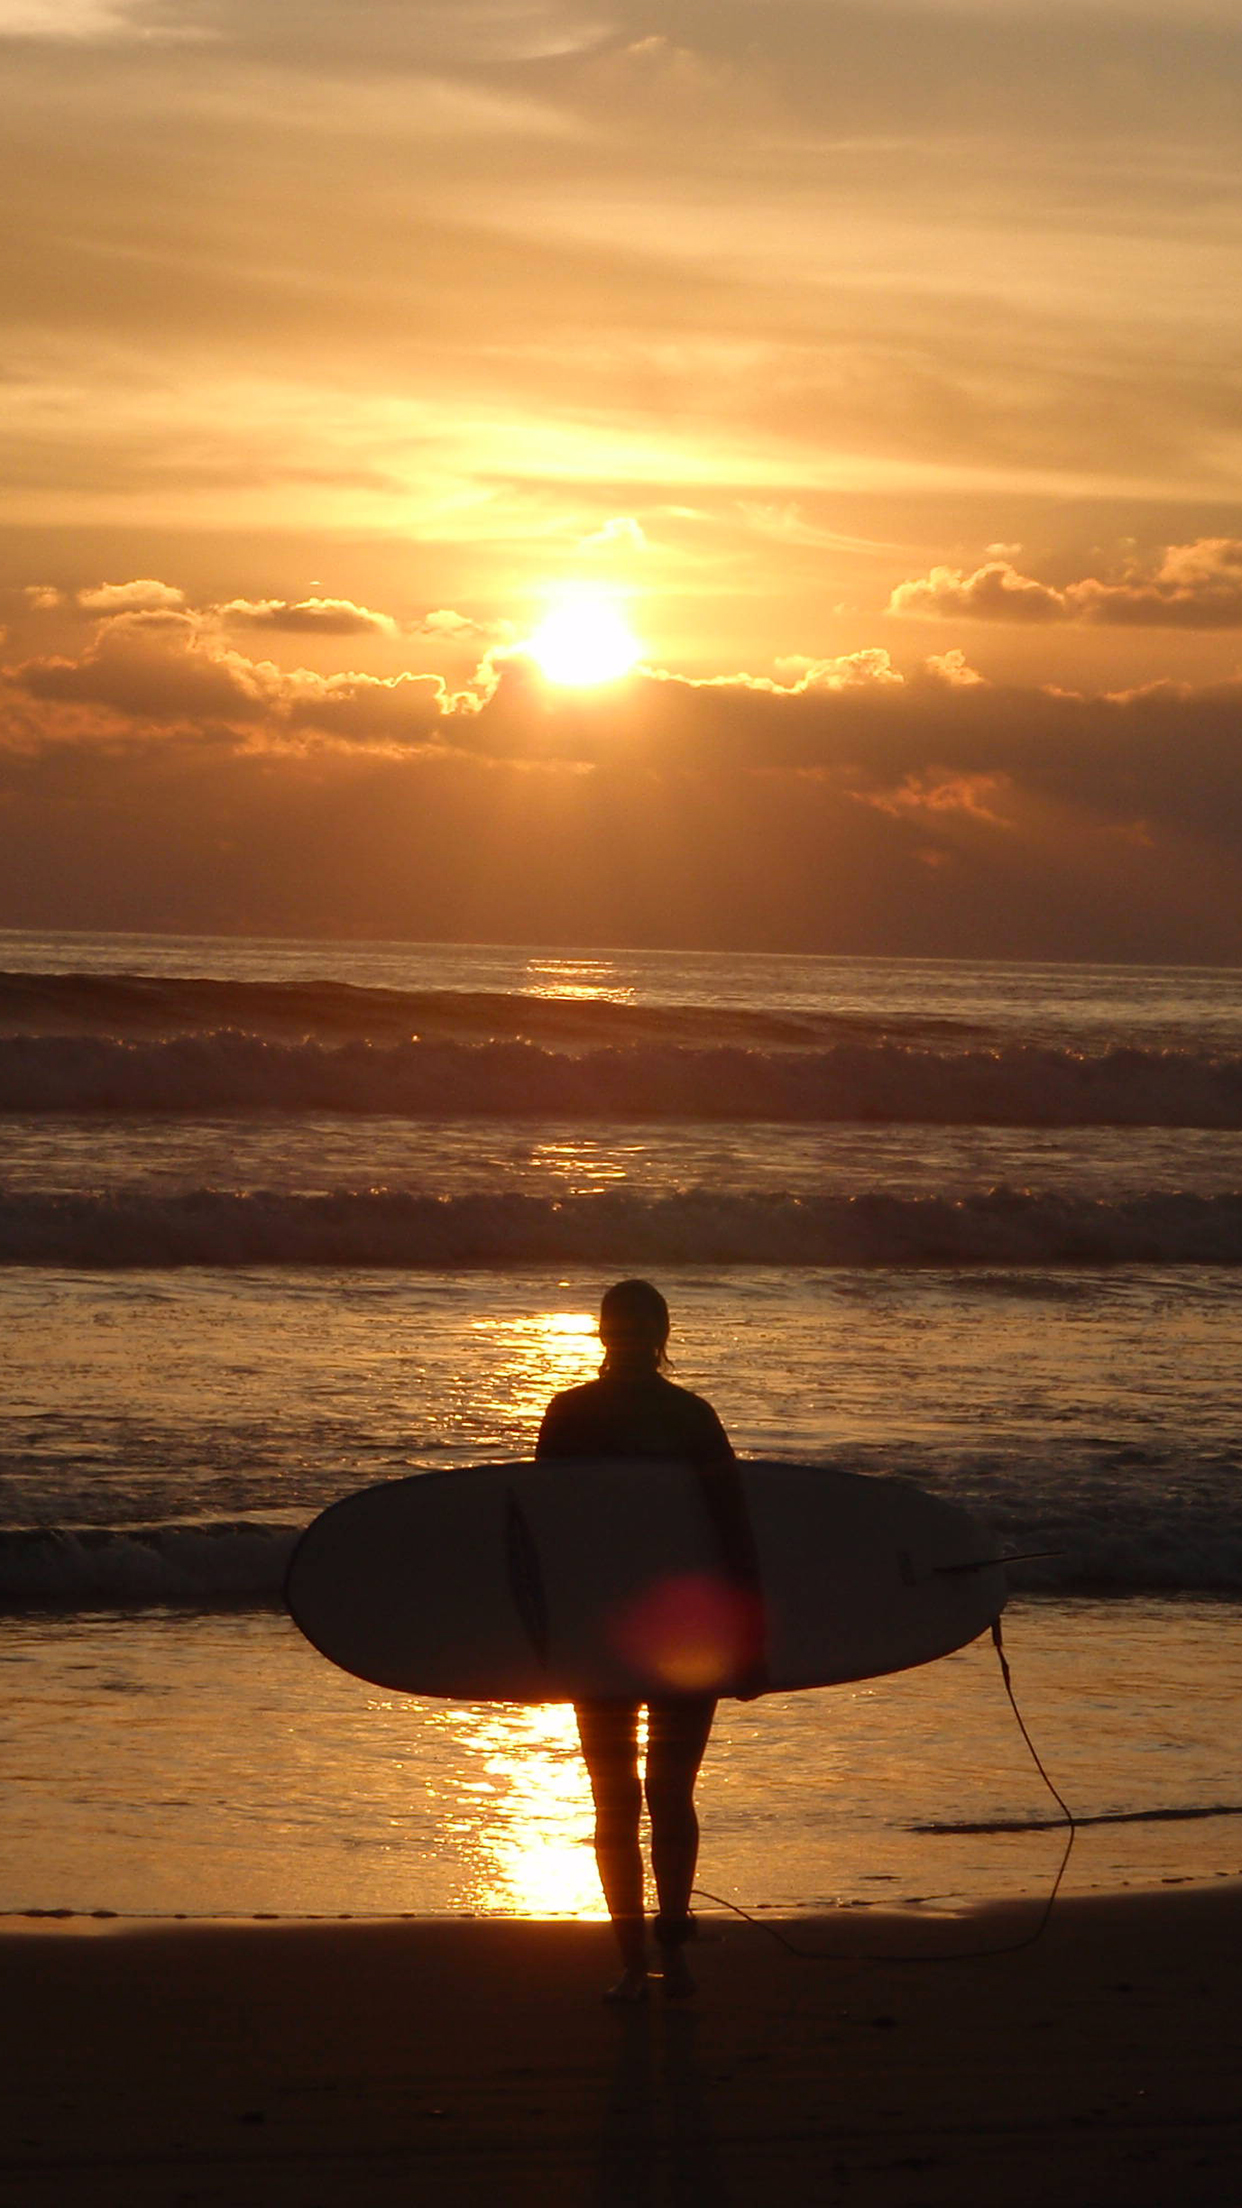 Surfing Sunset iPhone Parallax 3Wallpapers Les 3 Wallpapers iPhone du